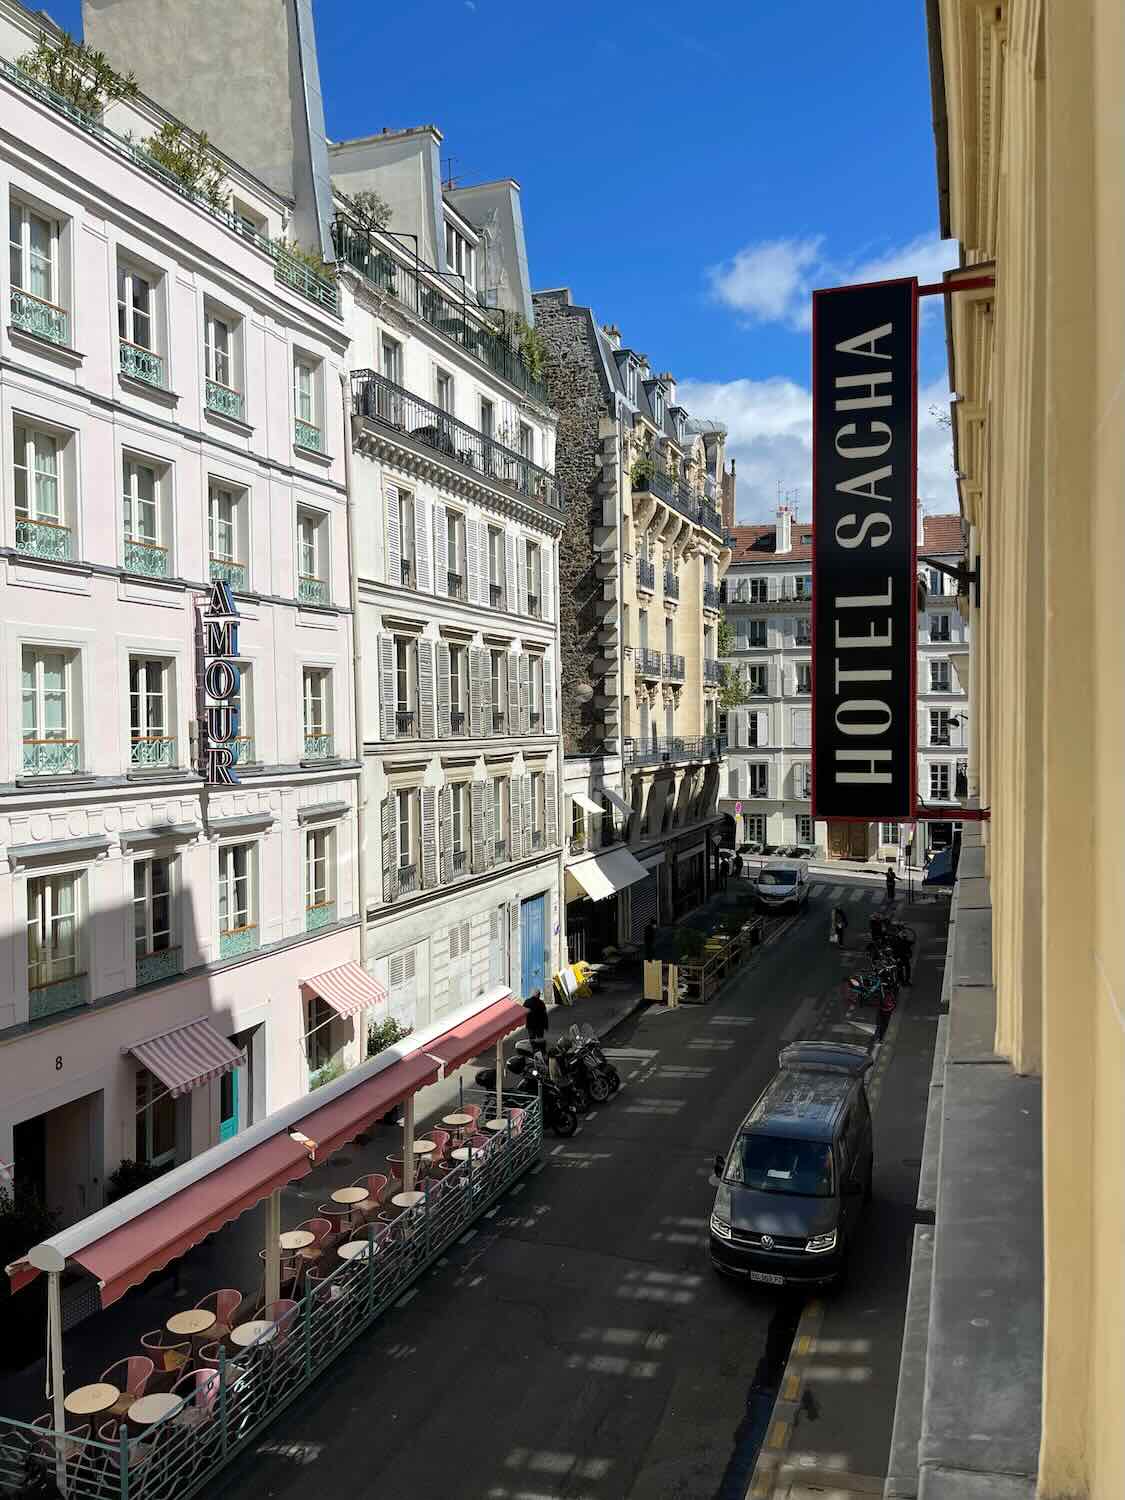 A view from the Hotel Sacha in Paris, showing a typical Parisian street scene with traditional buildings, sidewalk cafes, and a bustling street, capturing the vibrant urban life of the city.